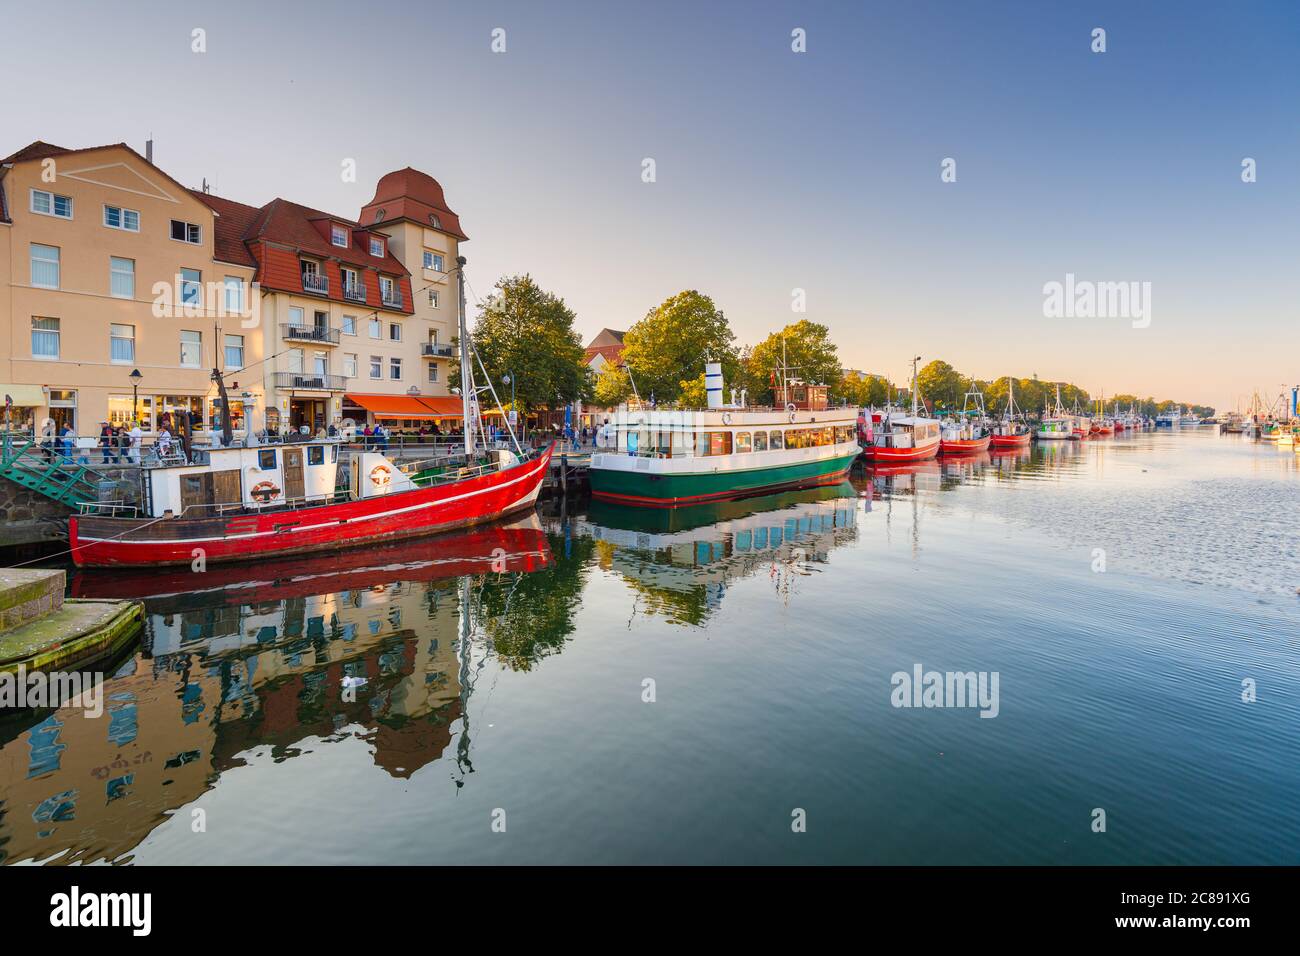 Warnemunde, Germany cityscape on Alte Strom old channel. Stock Photo